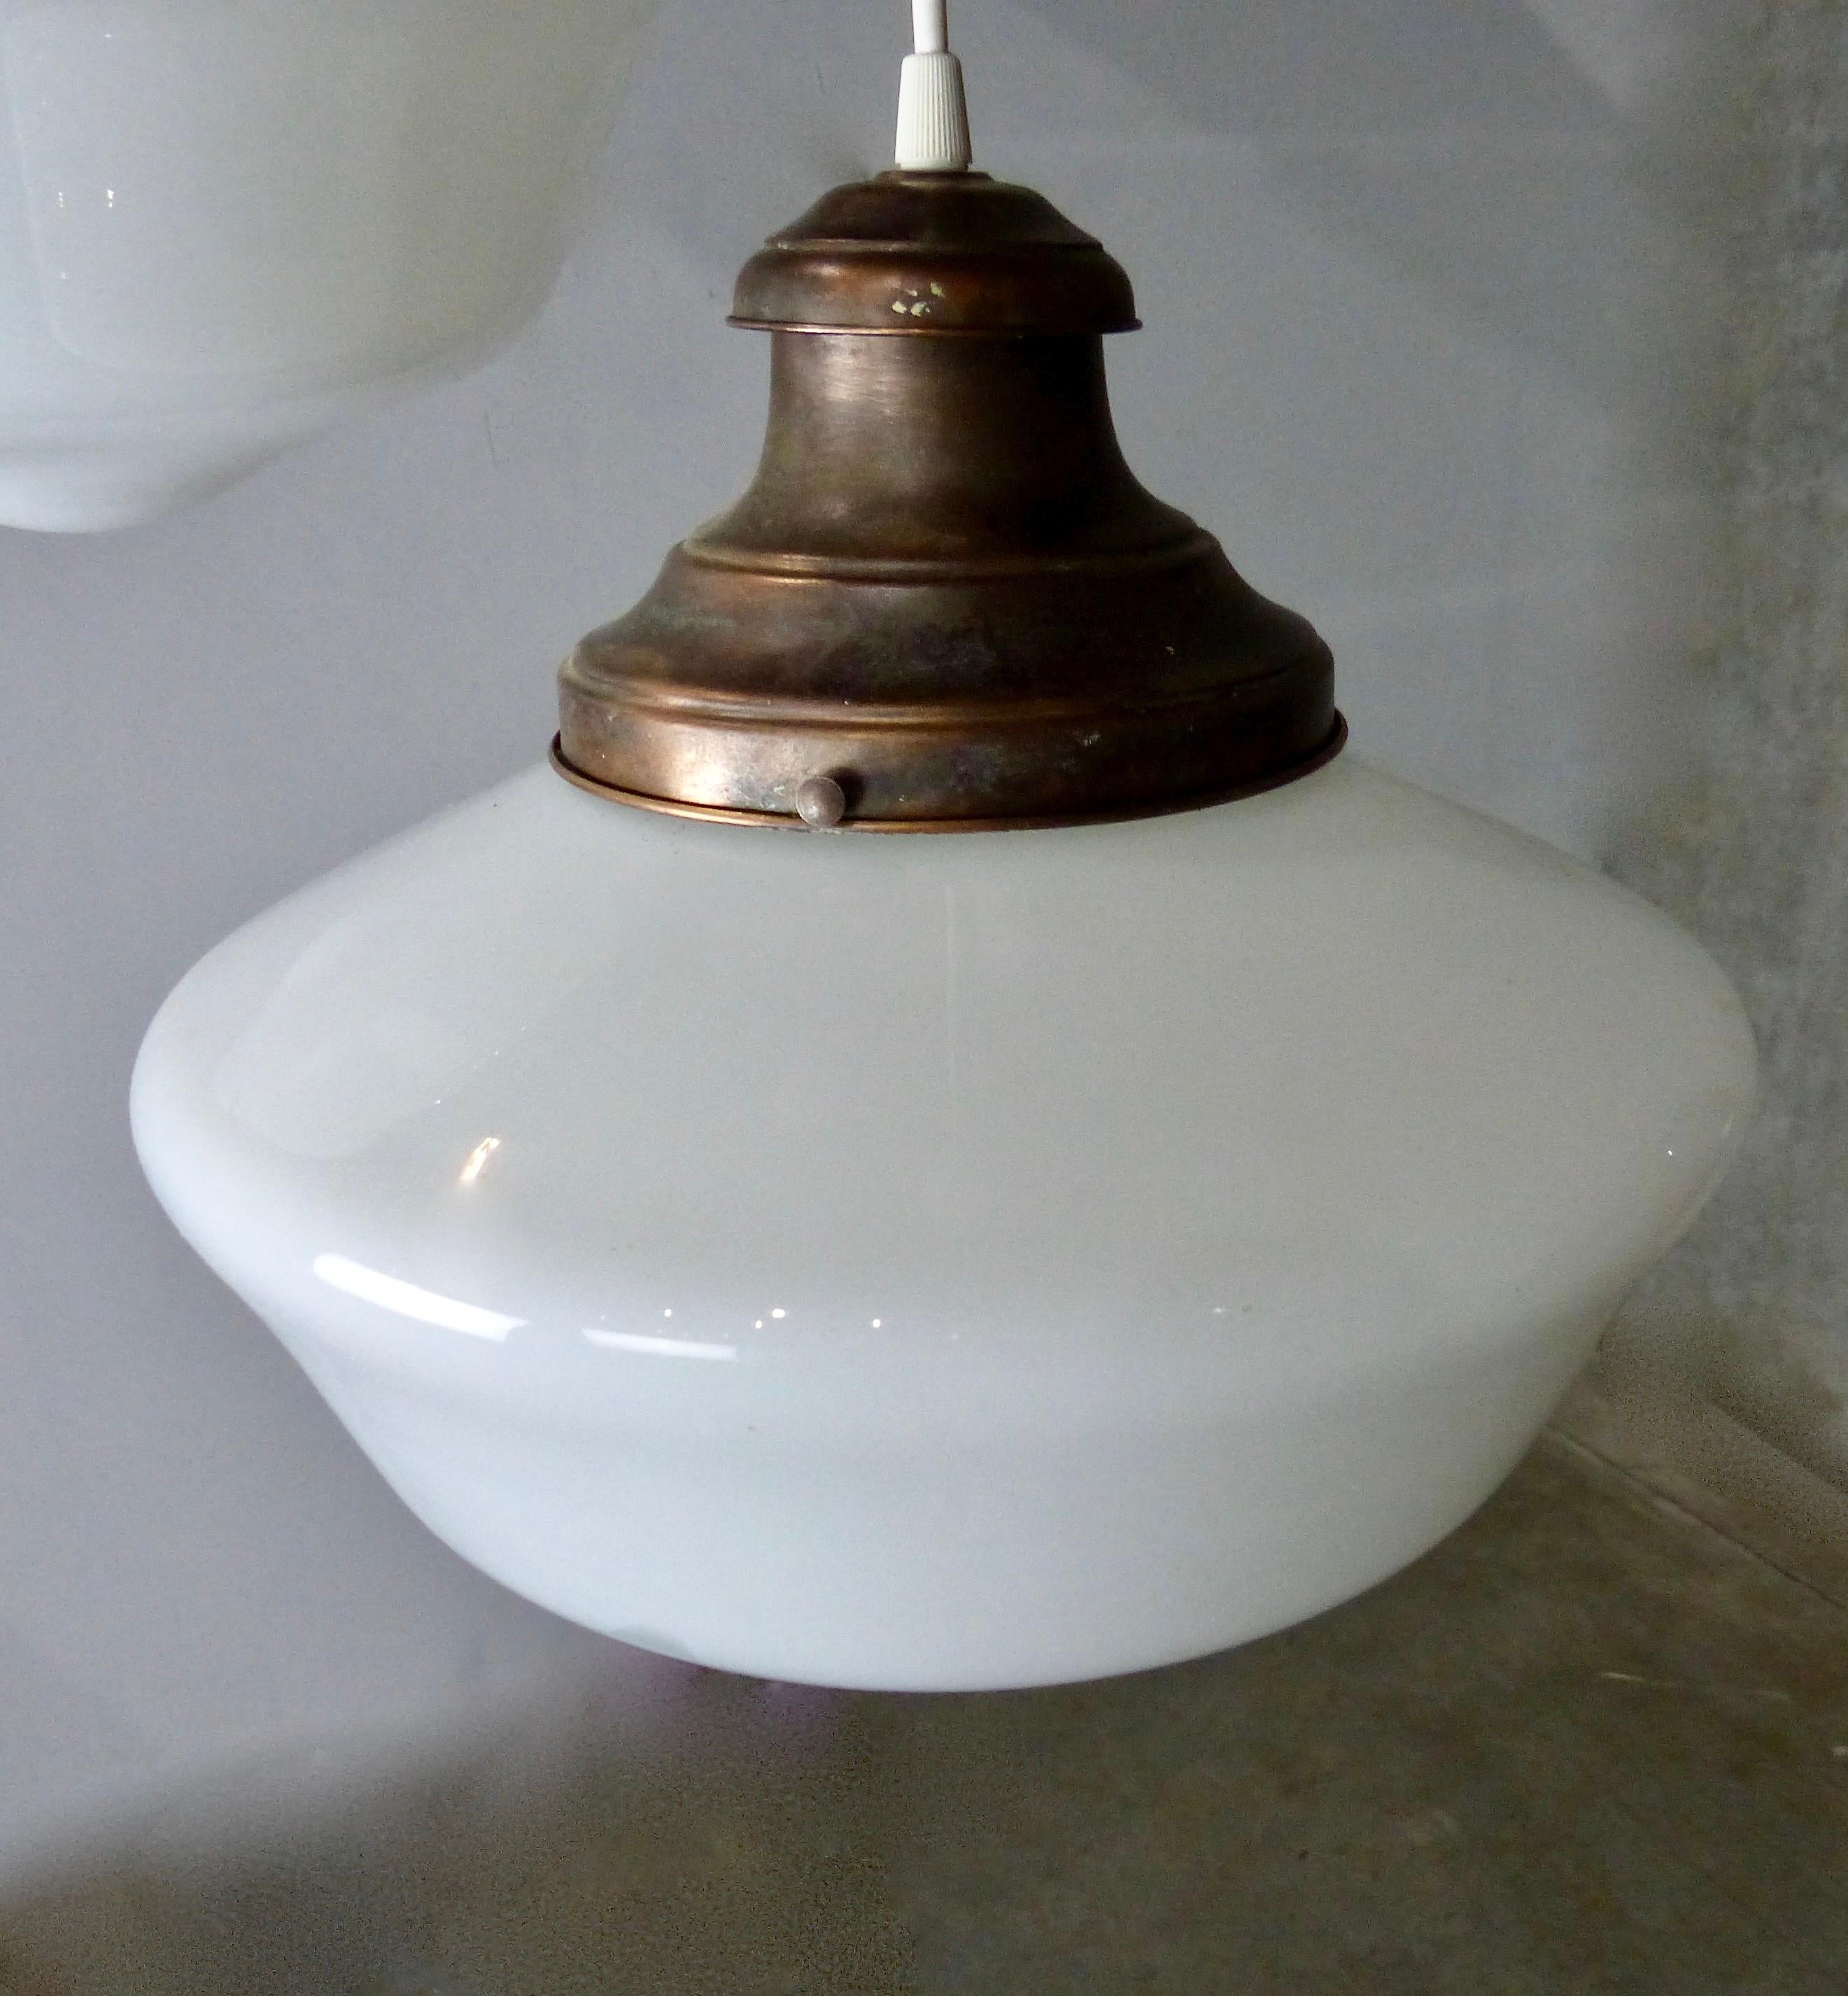 Set of three authentic copper and milk glass, schoolhouse style pendant lights from the 1920s. Original copper fitters. Re-wired and CSA approved to current electrical standards, ceiling mounting plate included. A popular look in modern farmhouse